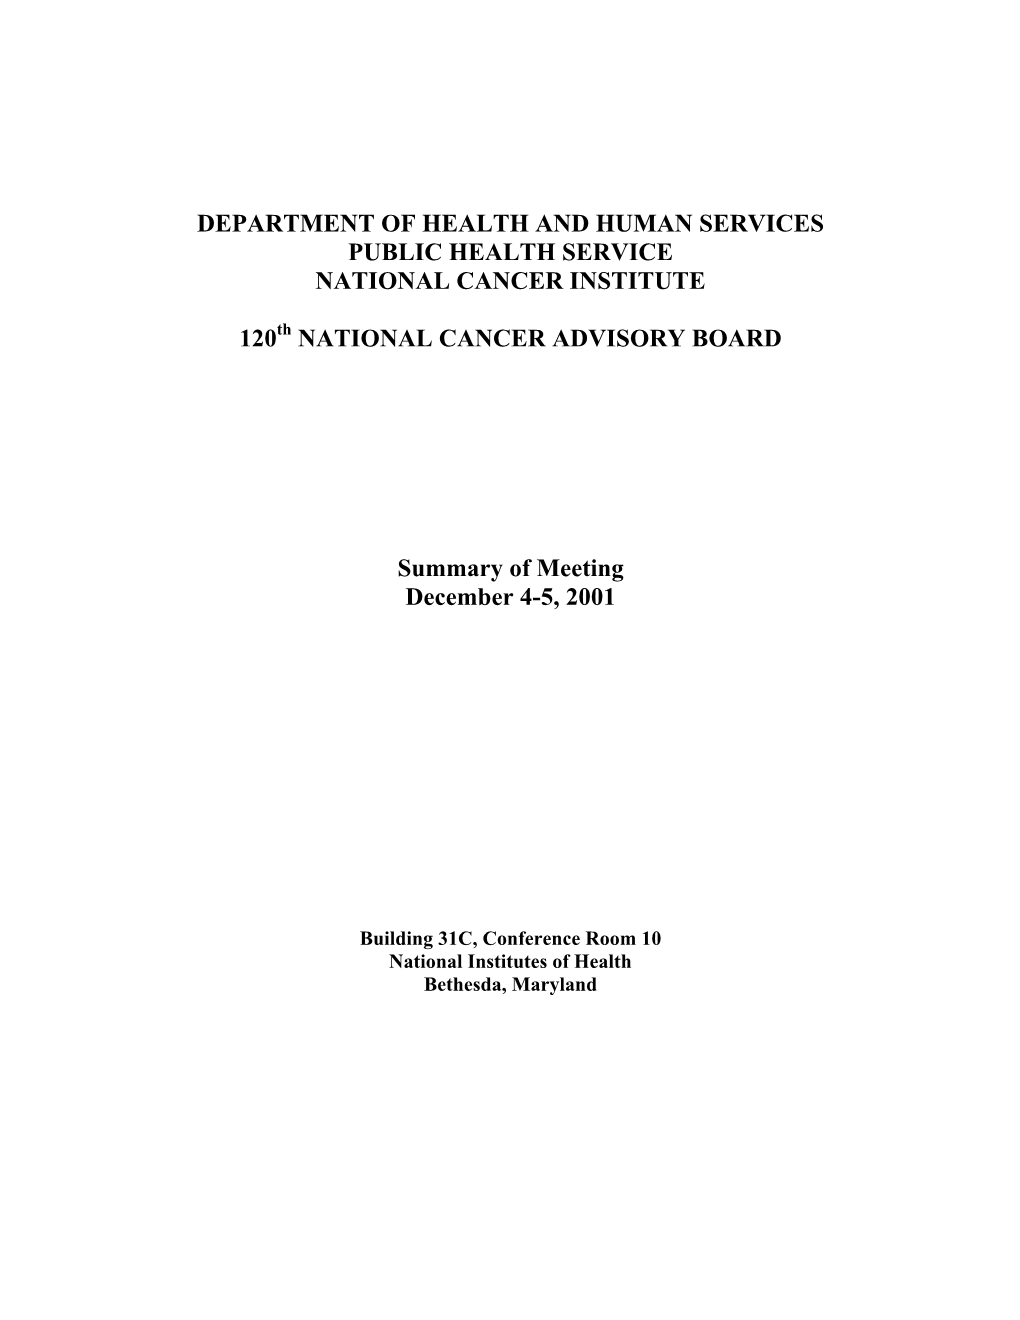 Department of Health and Human Services Public Health Service National Cancer Institute